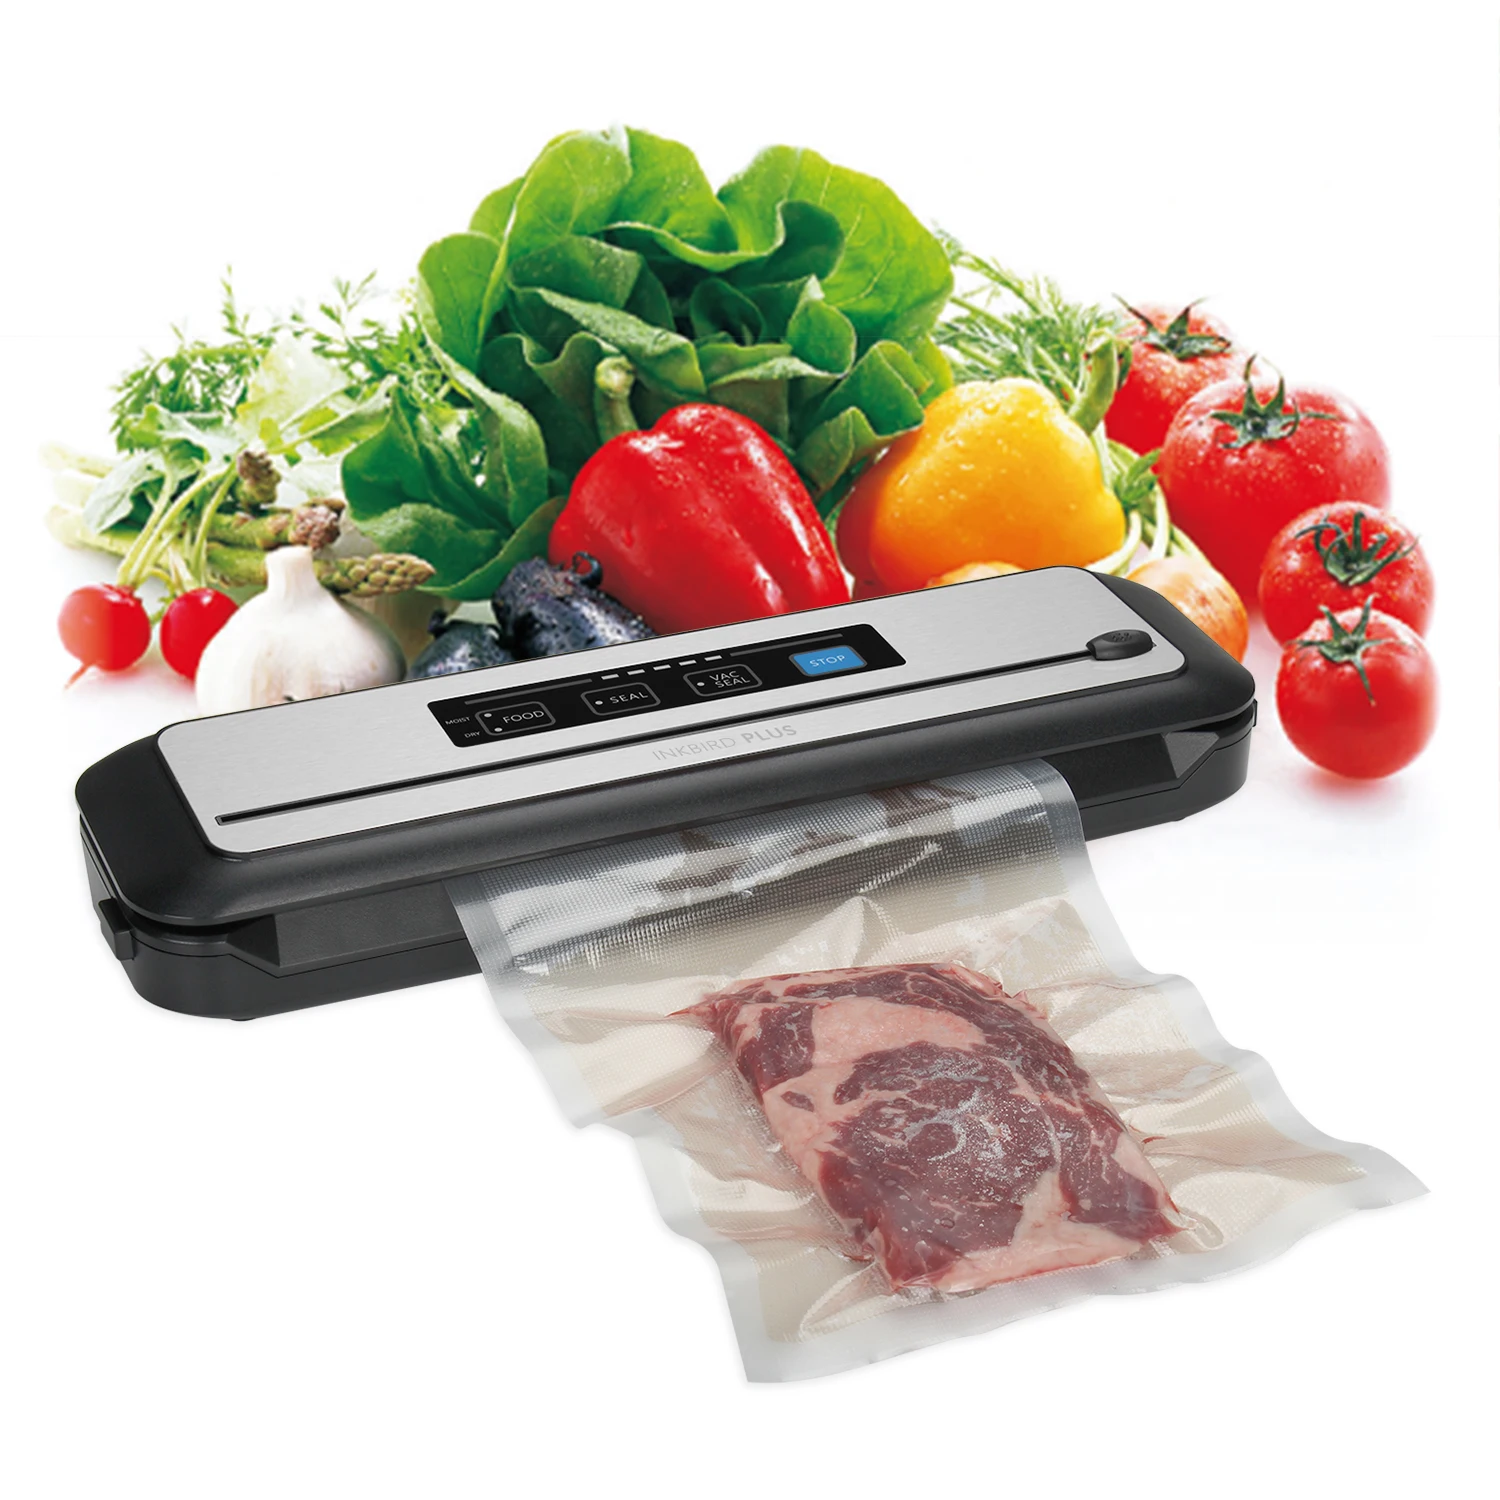 INKBIRD INK-VS01 Vacuum Sealer Best Automatic Sealing Machine for Food Preservation with Dry&Moist Modes Built-in Cutter stud welder dent repair kit 3kw spot welder dent puller with 6 welding modes auto body spot welding dent puller machine for car